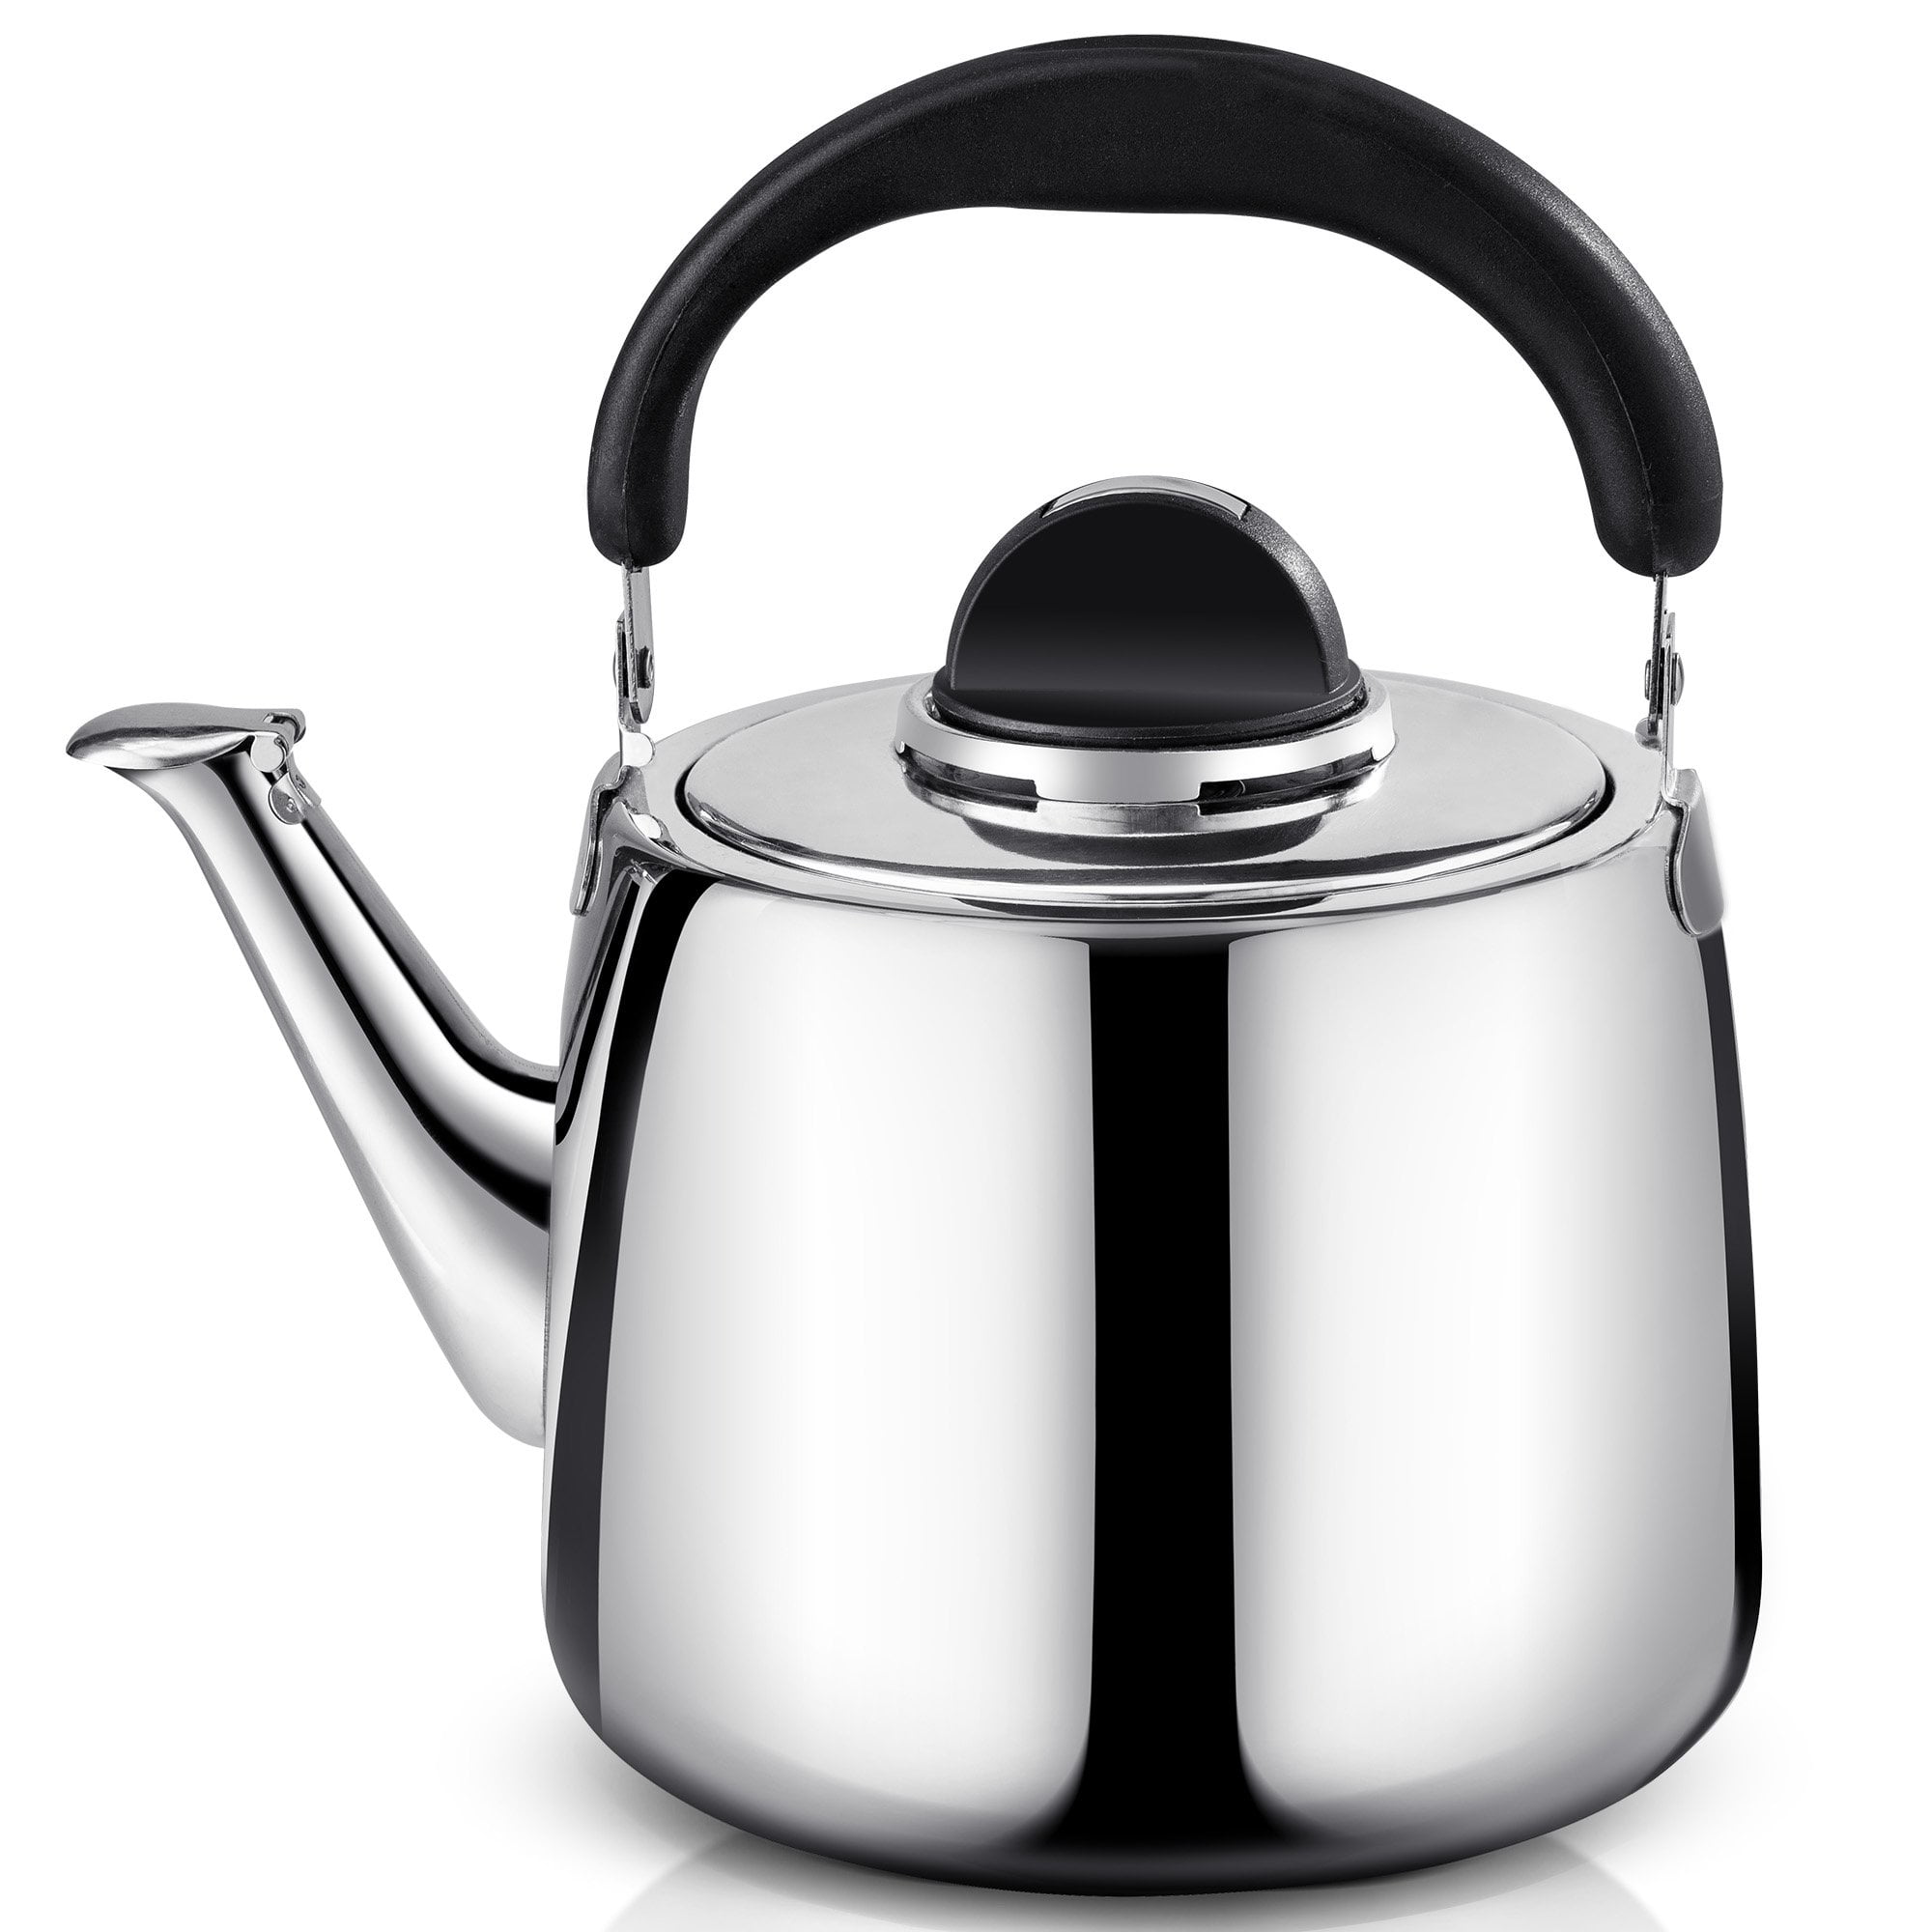 GANAZONO Stainless Steel Teapot Self Heating Hot Pot Tea Pots for Loose Tea  Stovetop Tea Maker Tea Kettle with Infuser Whistling Stainless Steel Water